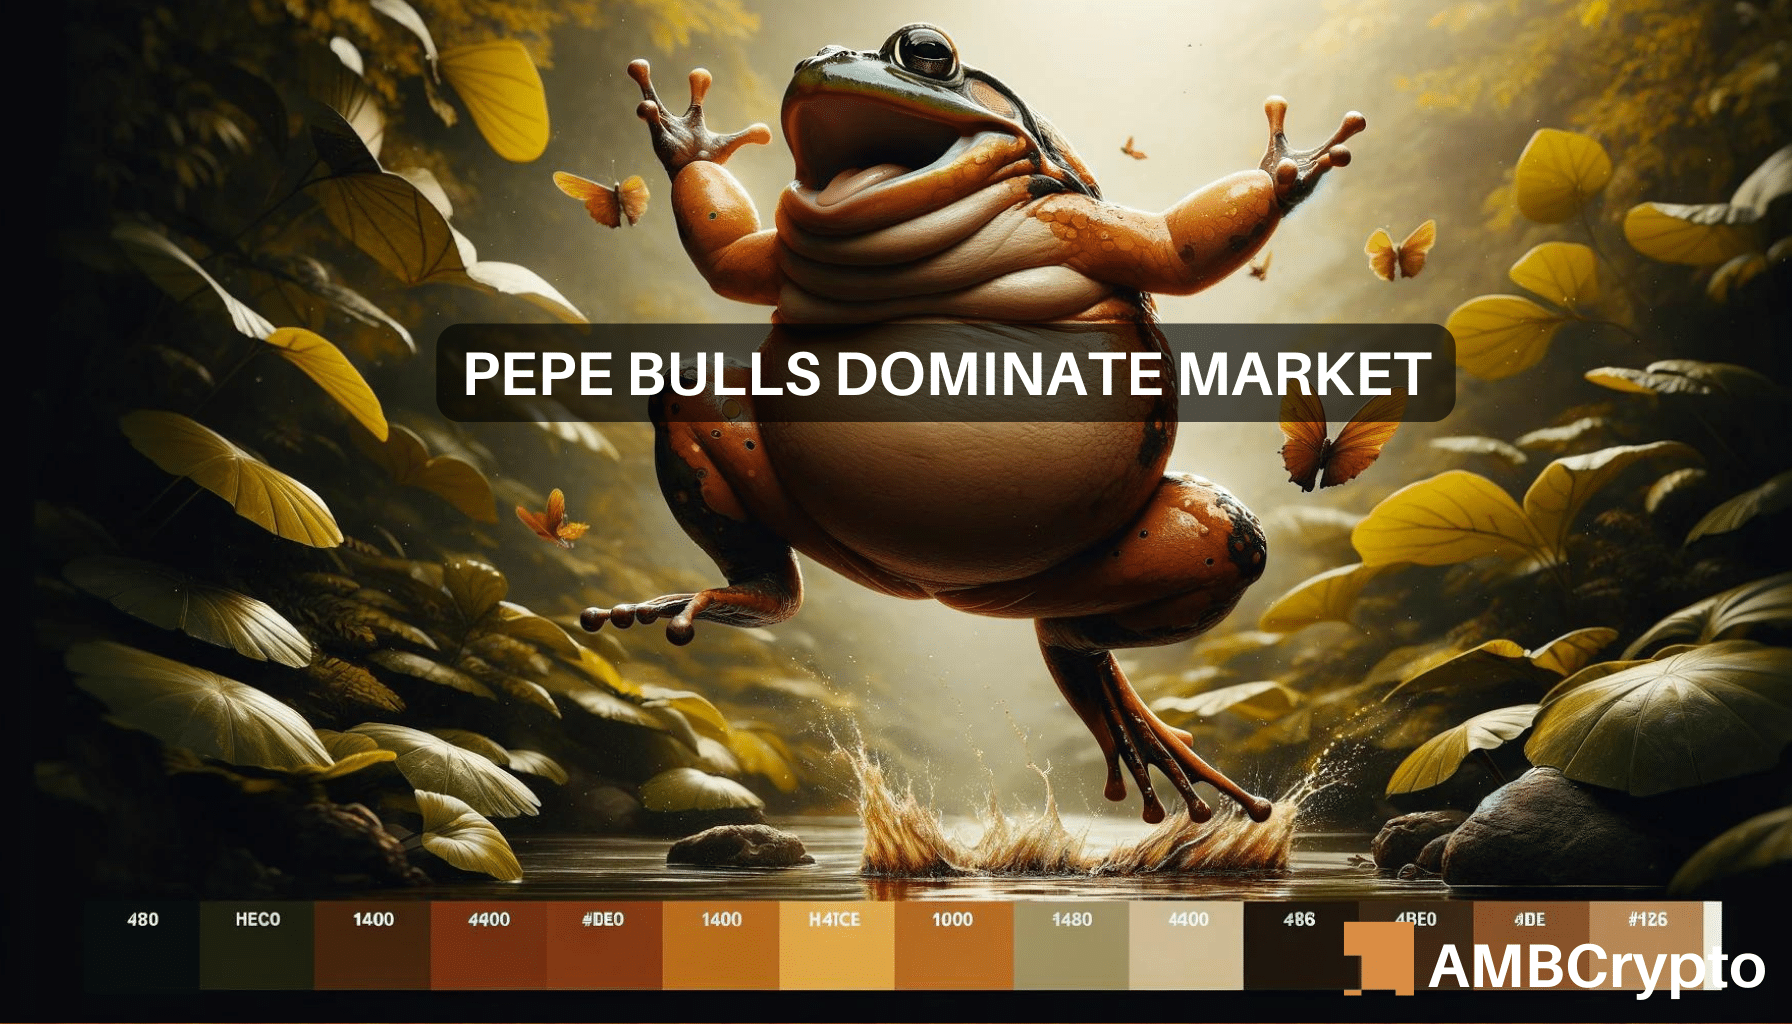 PEPE: 97.3% holders now 'in the money' - Should you remain bullish?